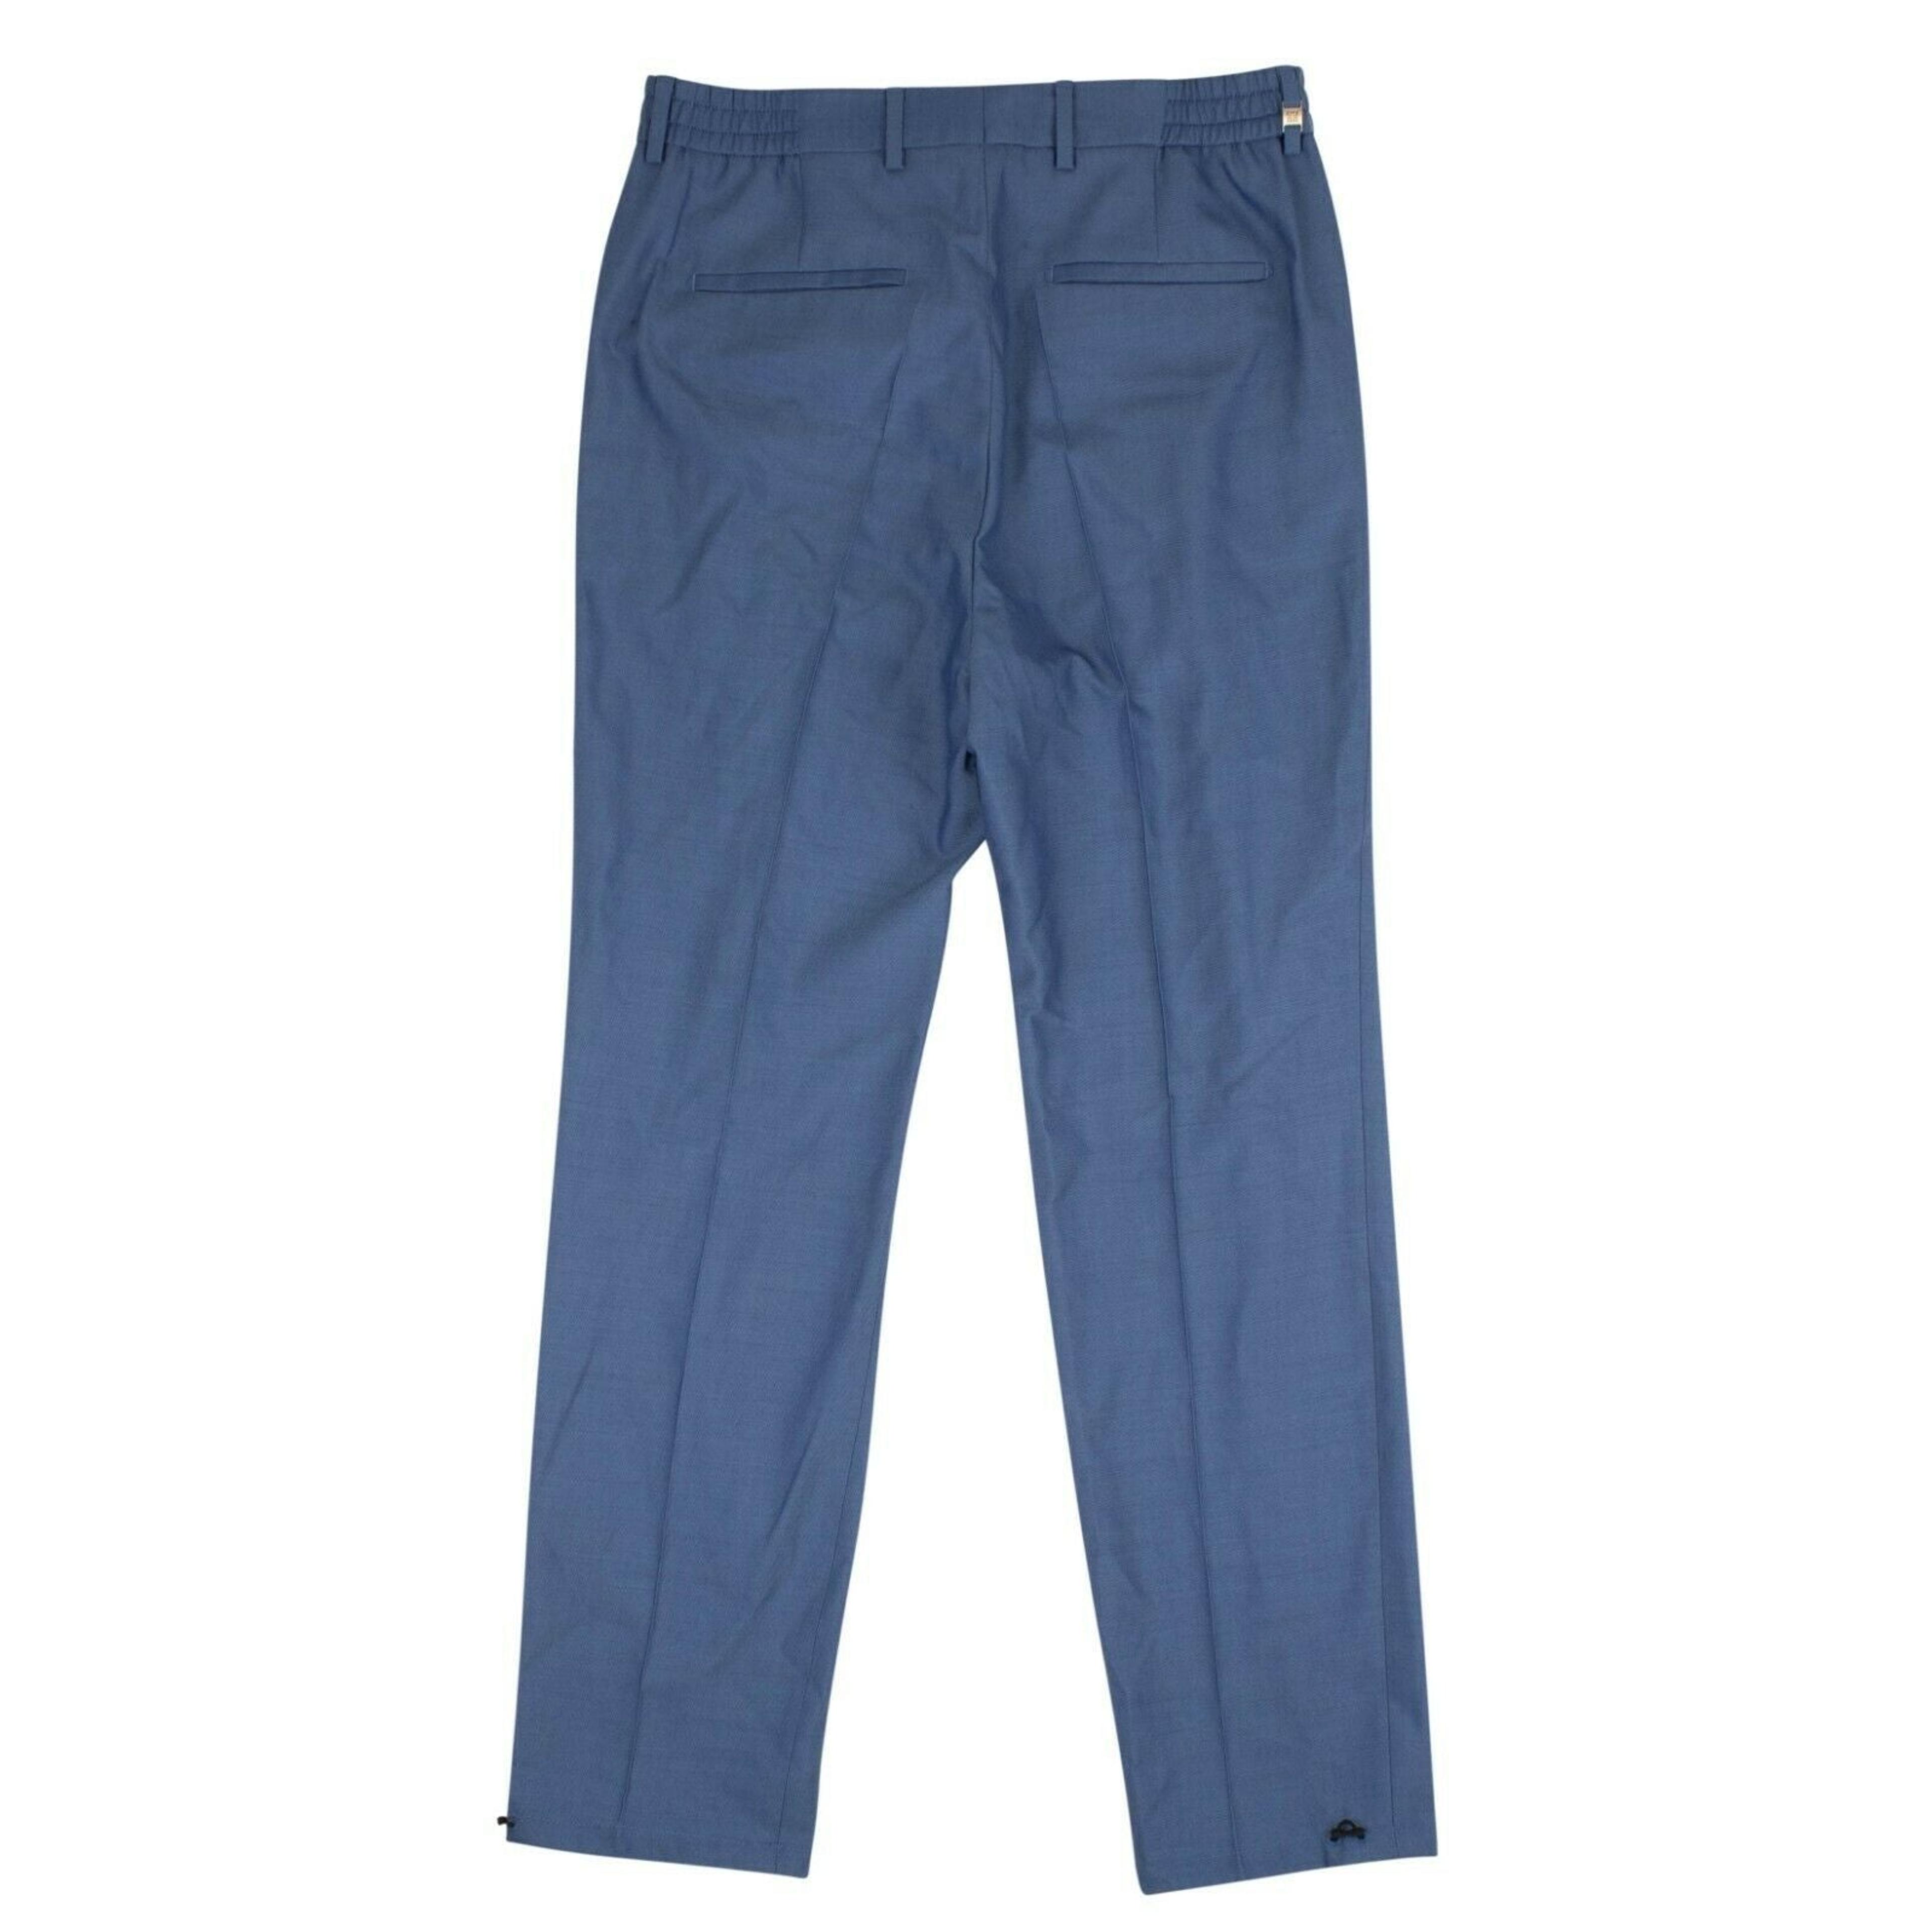 Alternate View 1 of Givenchy Pleated Pants - Blue